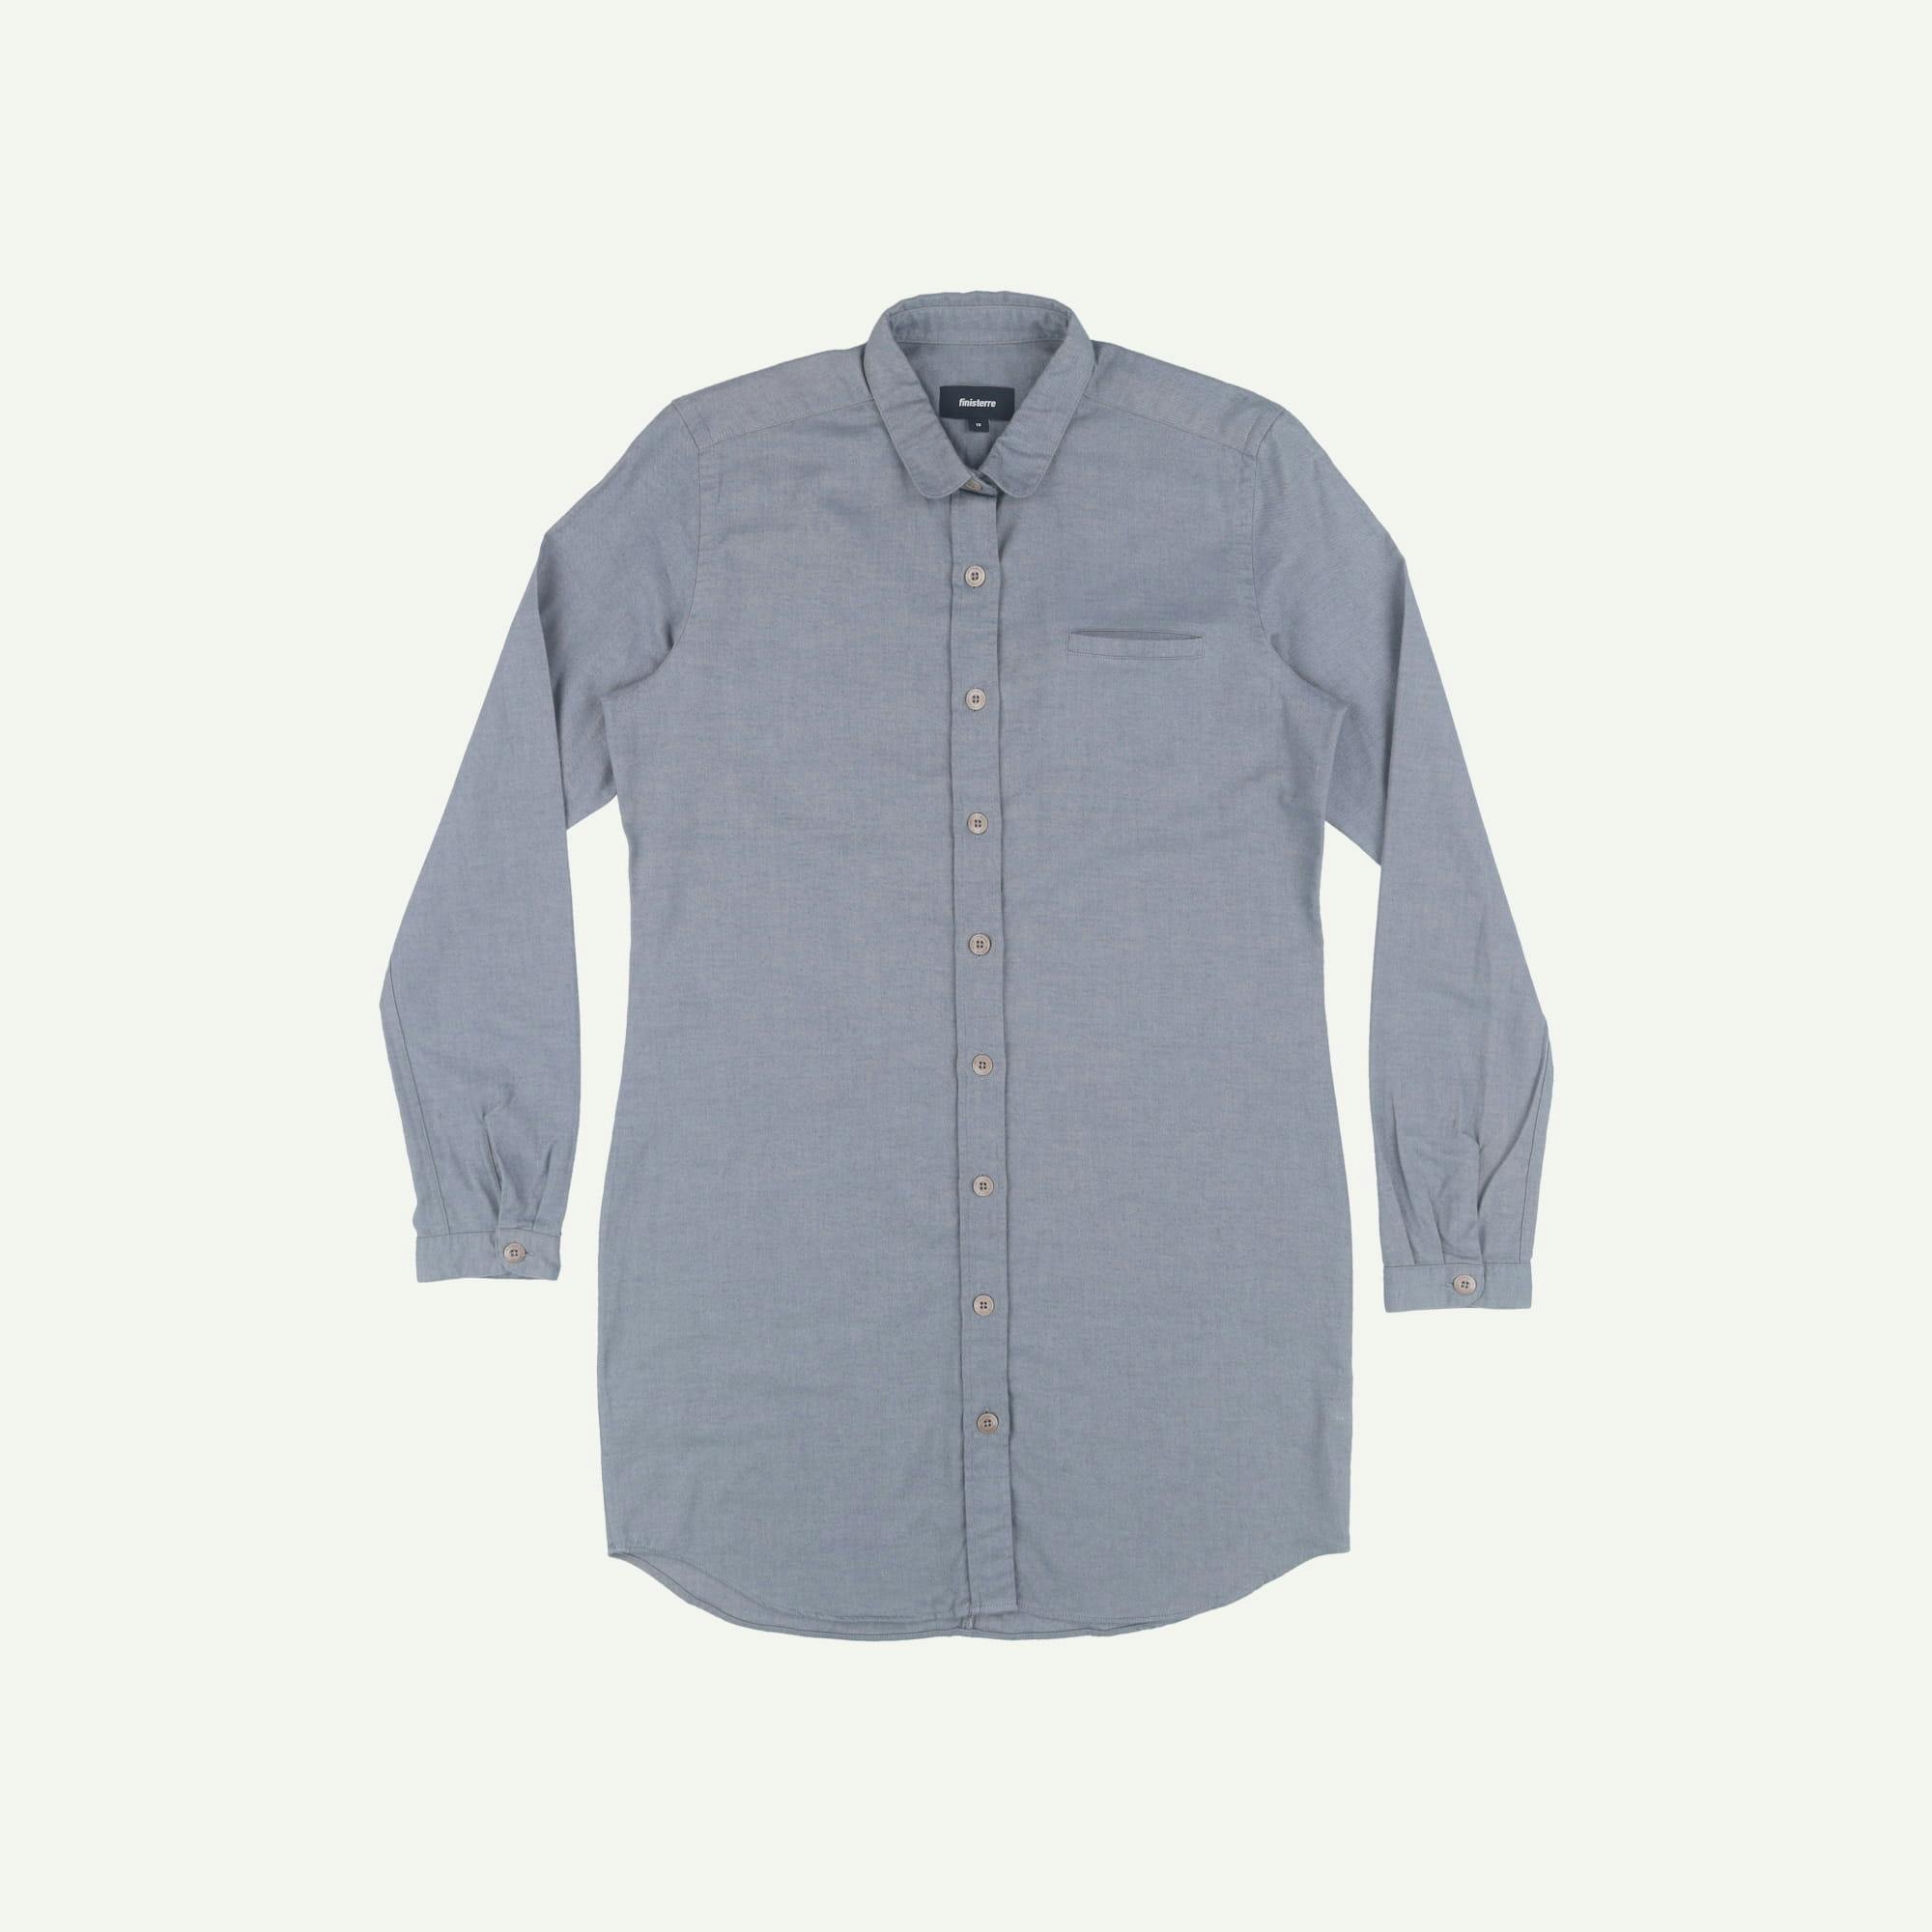 Finisterre As new Grey Shirt Dress